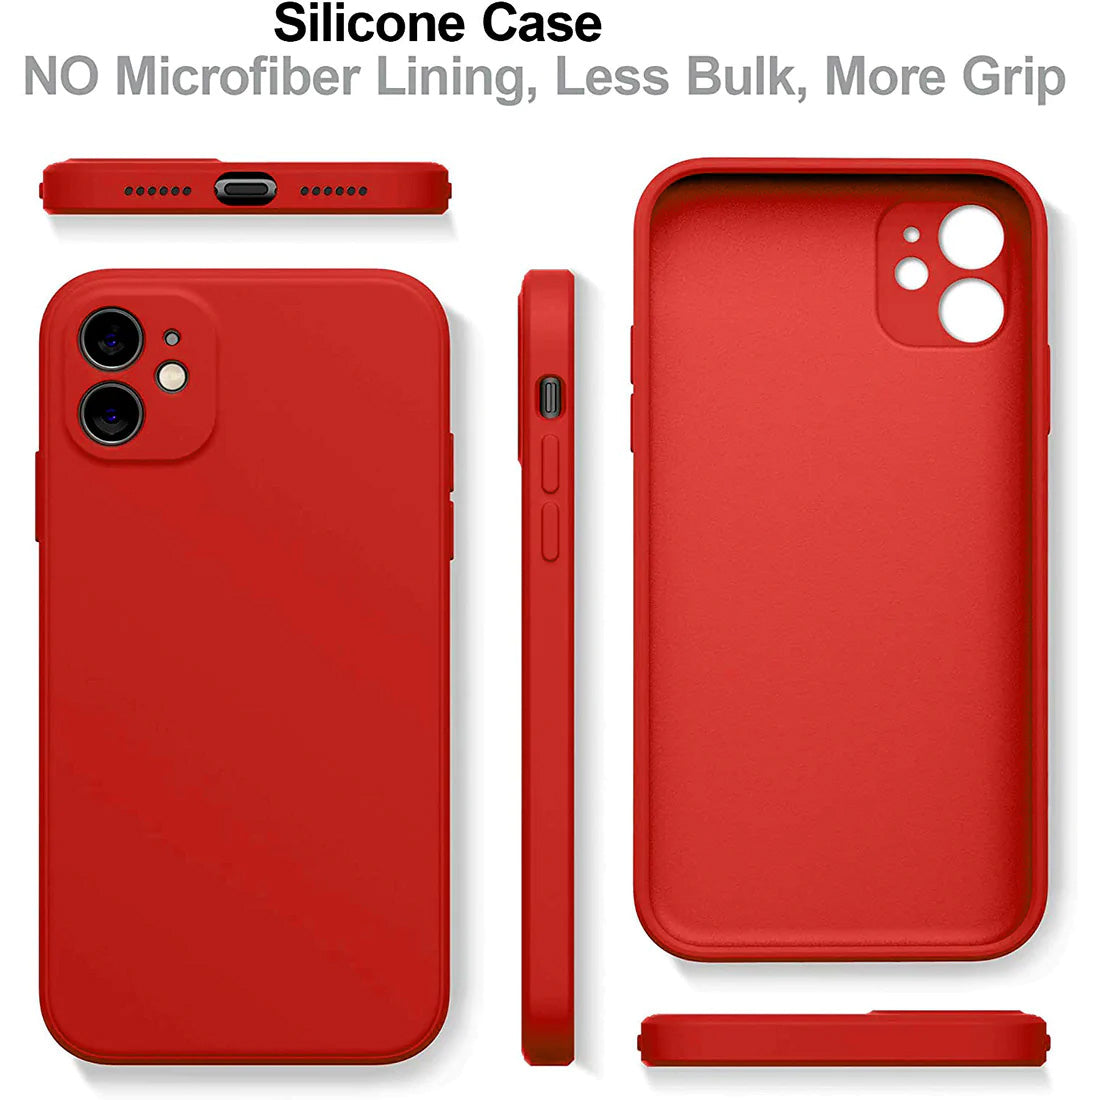 Liquid Silicone Back Case for Apple iPhone 11